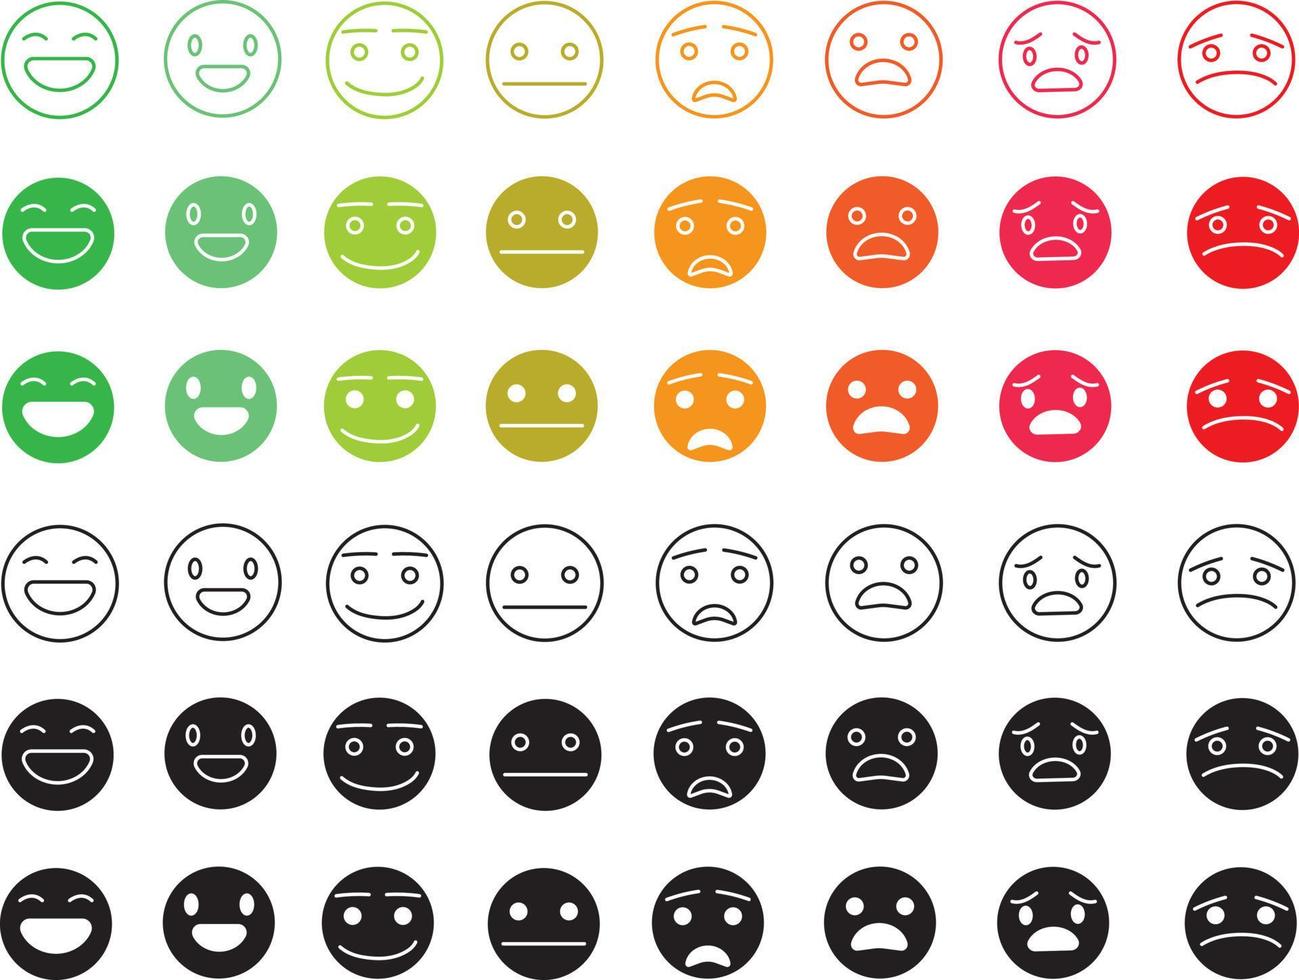 Emoticon emojis vector set. Emoji characters with pose and emotions like happy, in love, eating and thinking in yellow face icon for emoticons avatar character collection design. Vector illustration